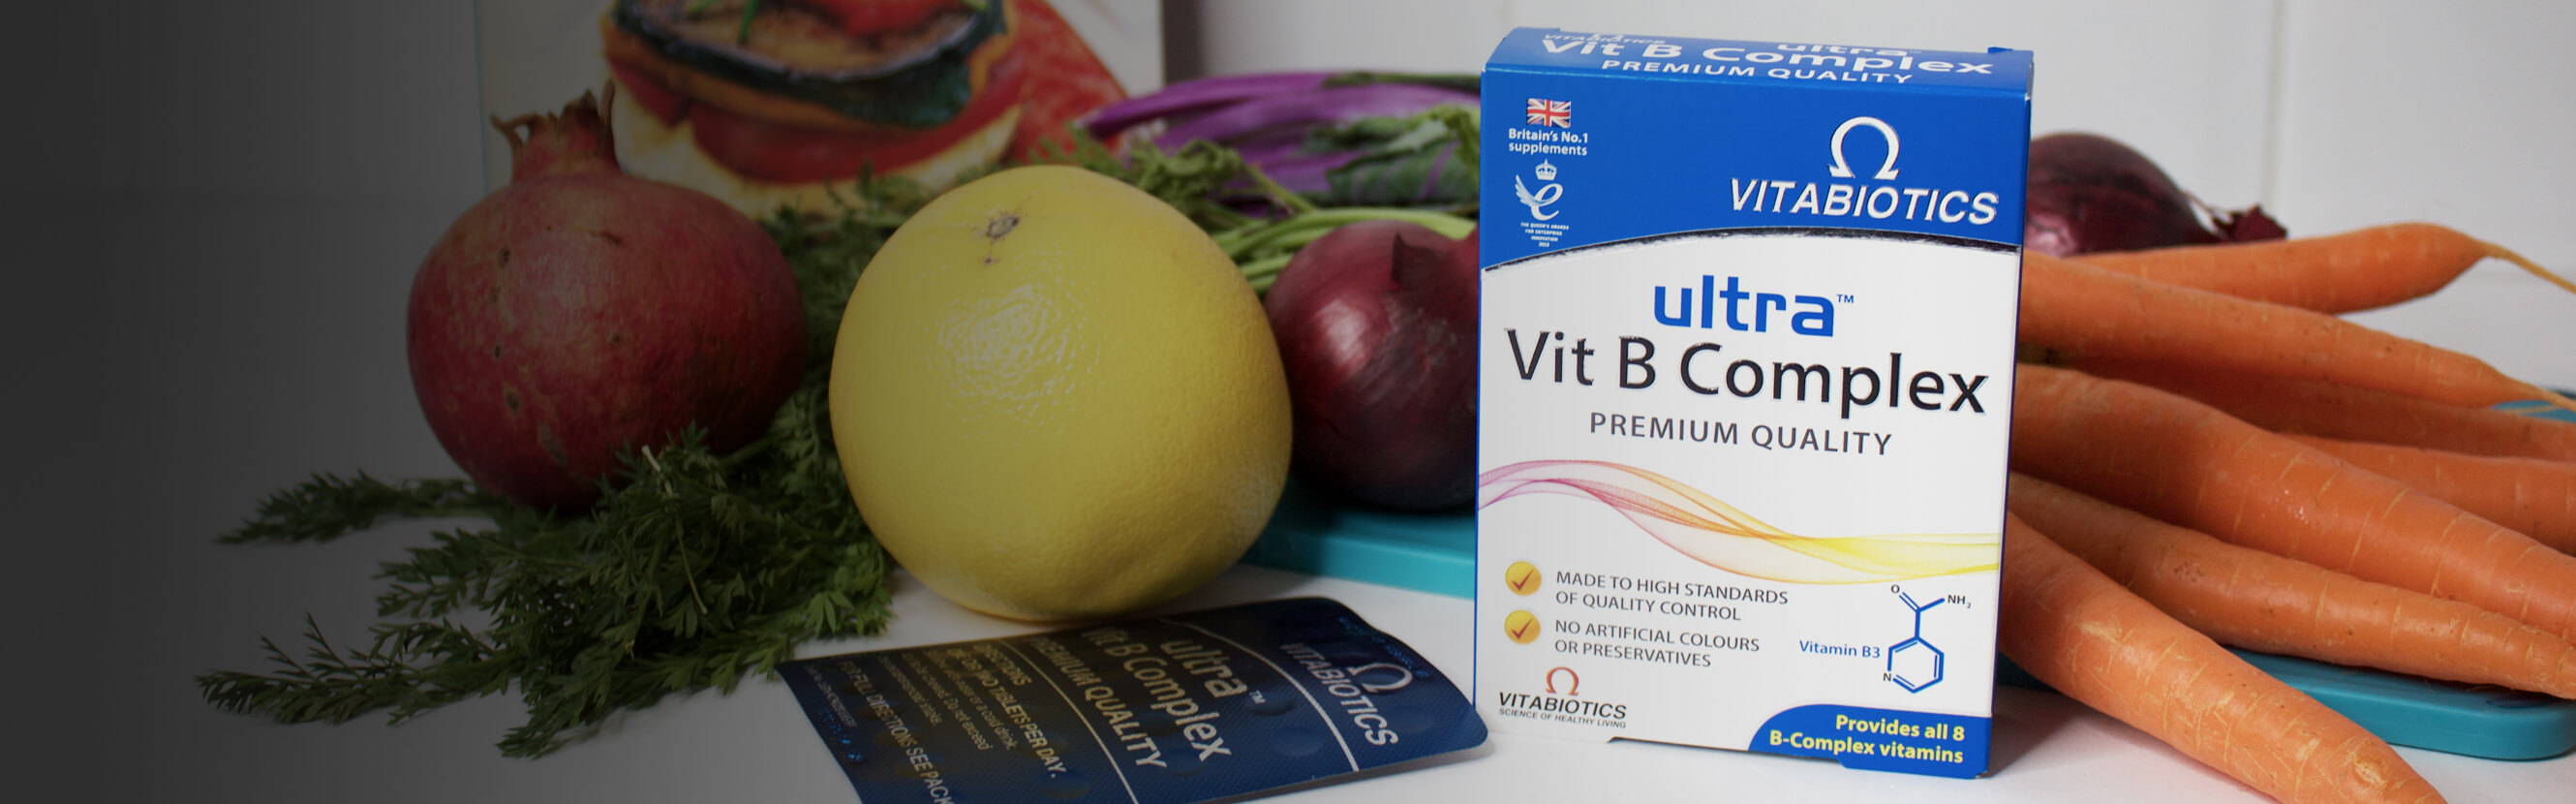  Are you getting all your B vitamins every day? Ultra Vitamin B Complex contains all 8 vitamins including thiamin which contributes to the normal function of the nervous system and pantothenic acid which contributes to the reduction of tiredness and fatigue. 